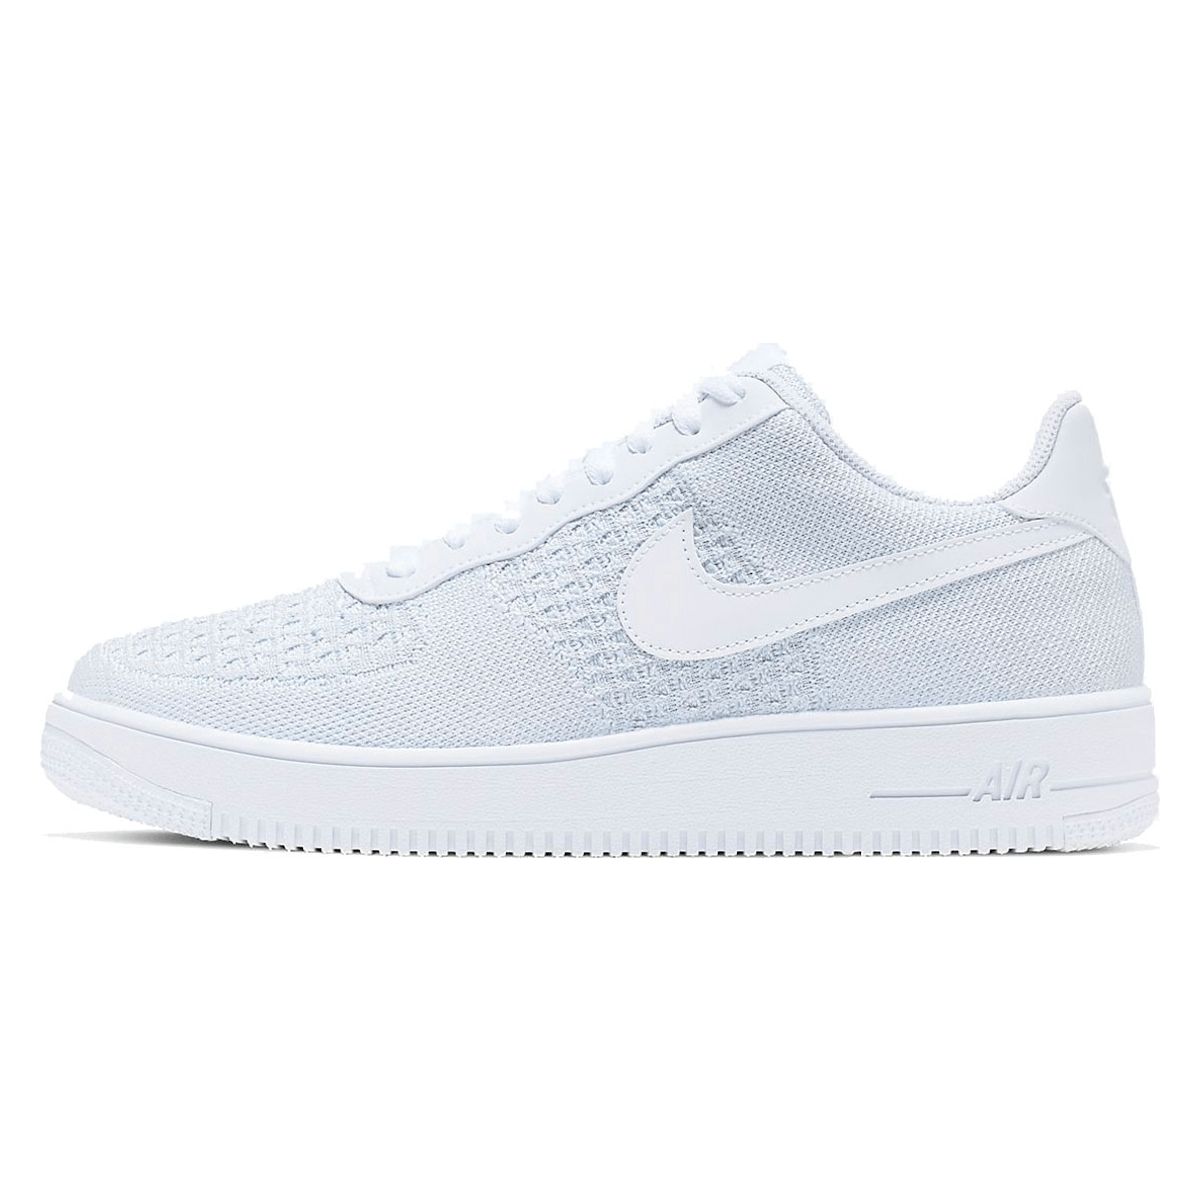 Nike Air Force 1 Flyknit 2.0 "Pure Platinum"